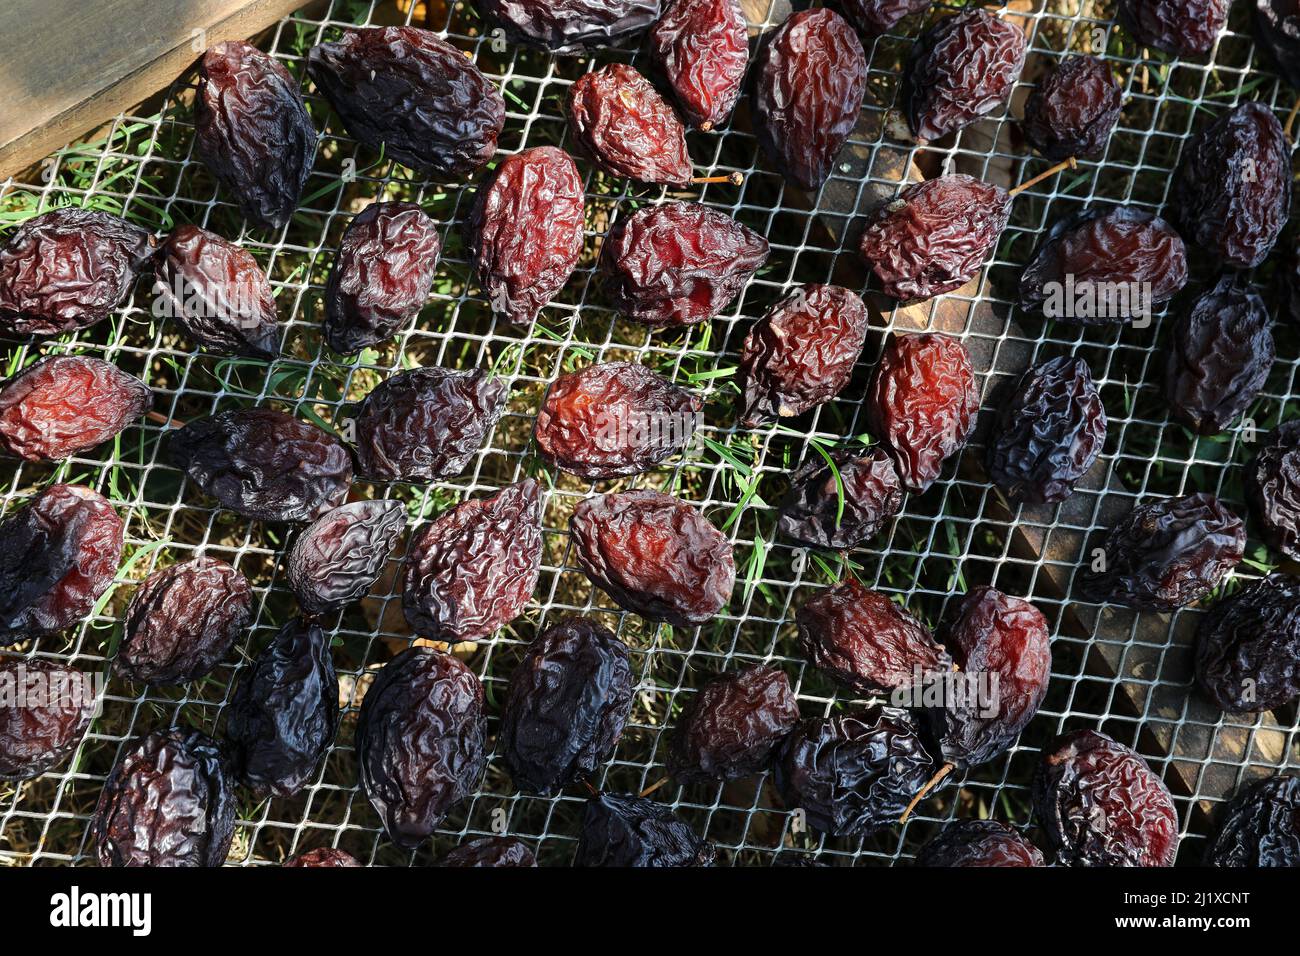 Cultivation of Agen prunes: Ente plum drying in crates after the harvest. The fruits are spread over trays to be dried Stock Photo